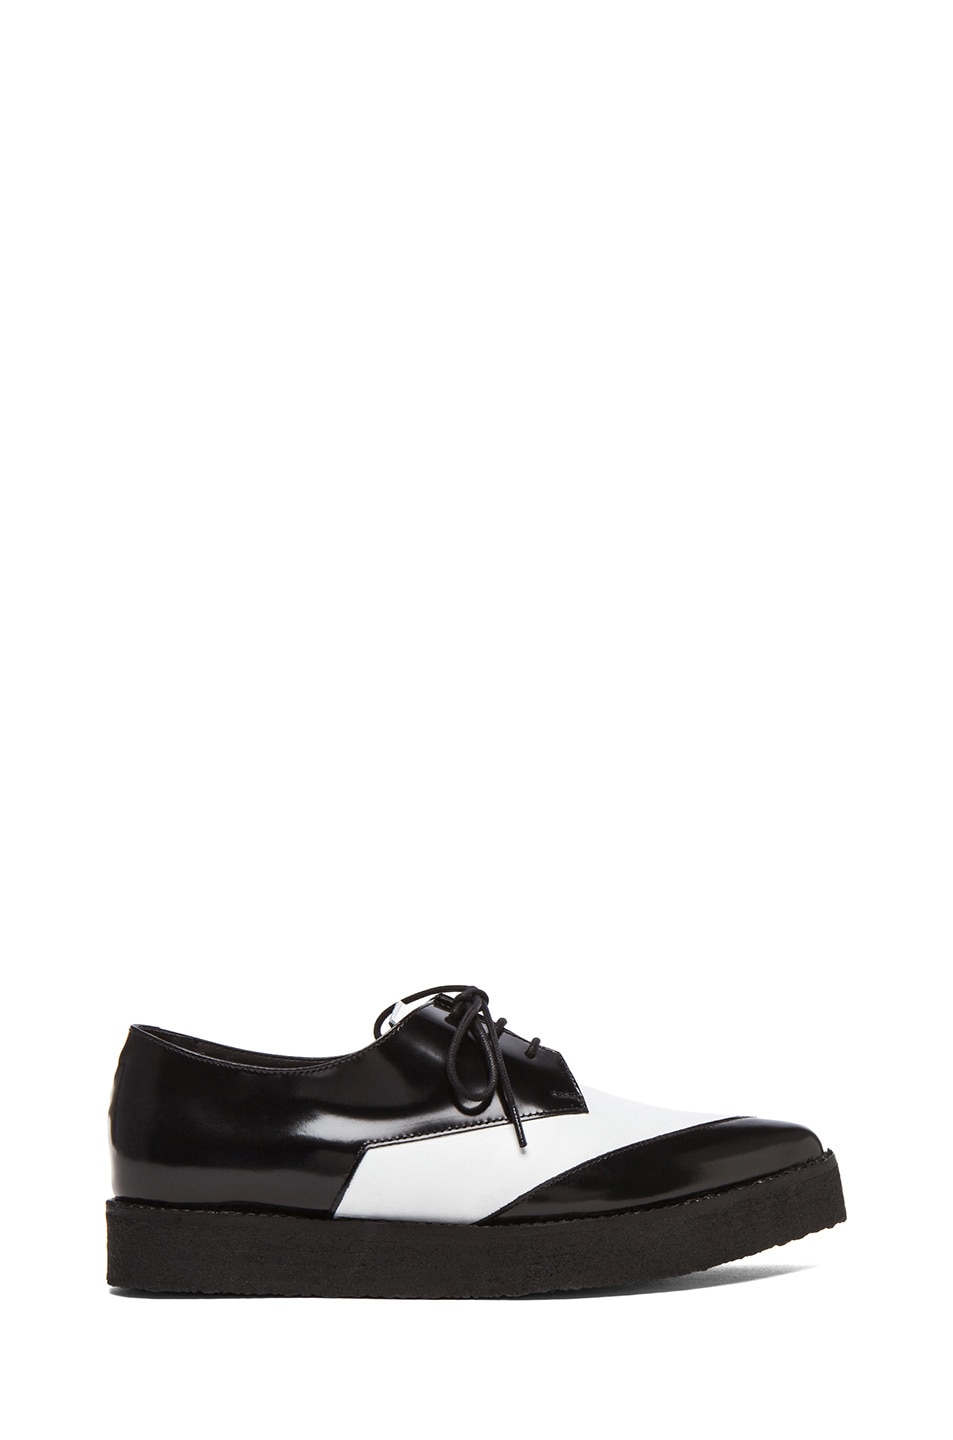 Image 1 of Pierre Hardy Lace Up Leather Dress Shoes in Black & White